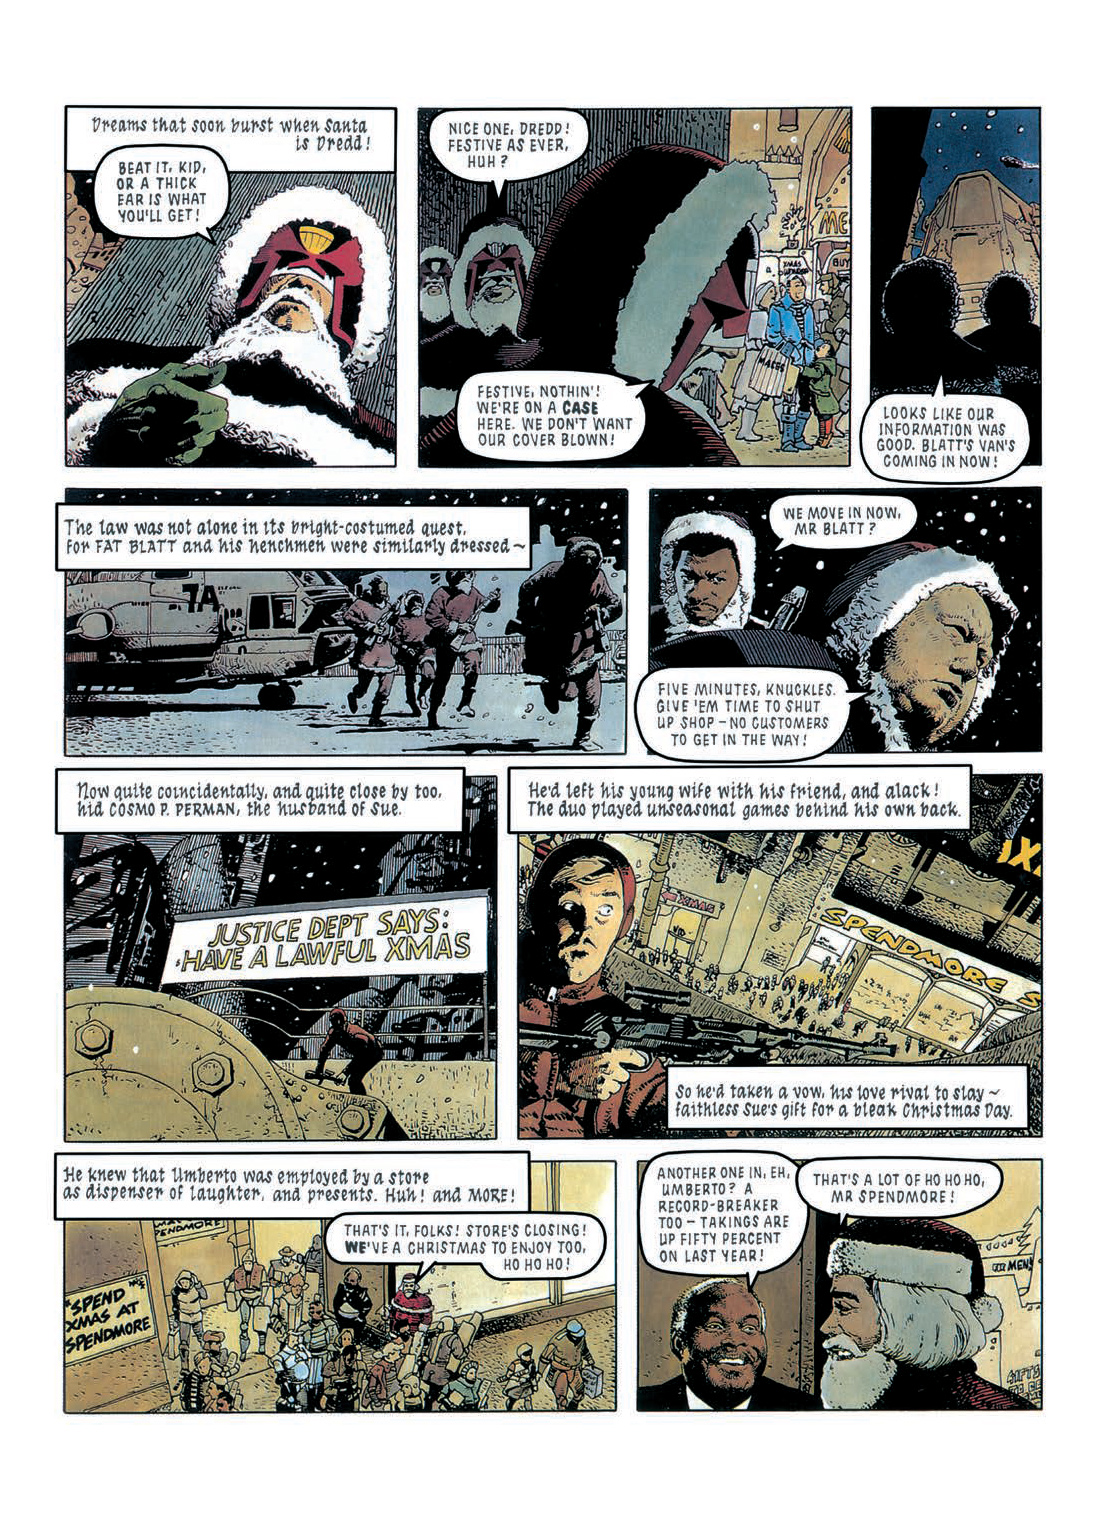 Read online Judge Dredd: The Restricted Files comic -  Issue # TPB 2 - 284